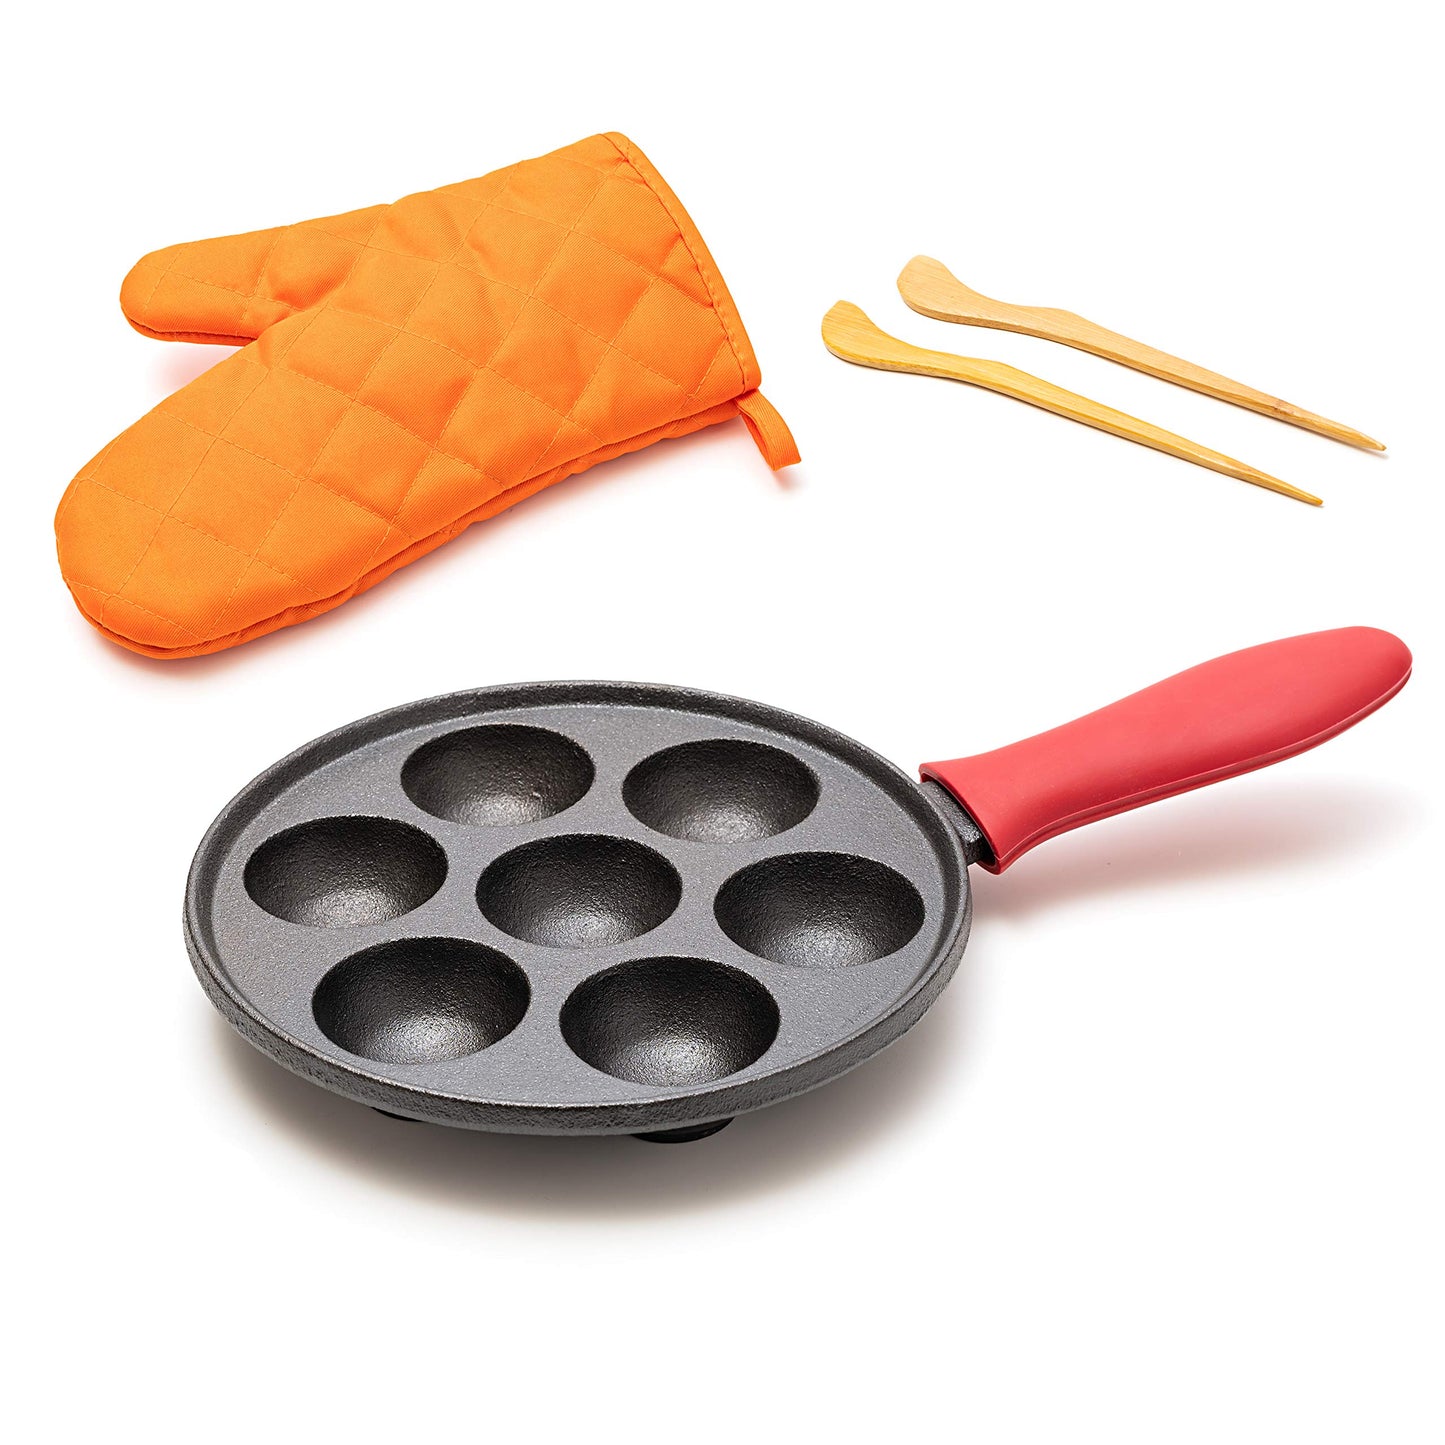 Cast Iron Aebleskiver Pan for Authentic Danish Stuffed Pancakes - Complete with Bamboo Skewers, Silicone Handle and Oven Mitt - by KUHA